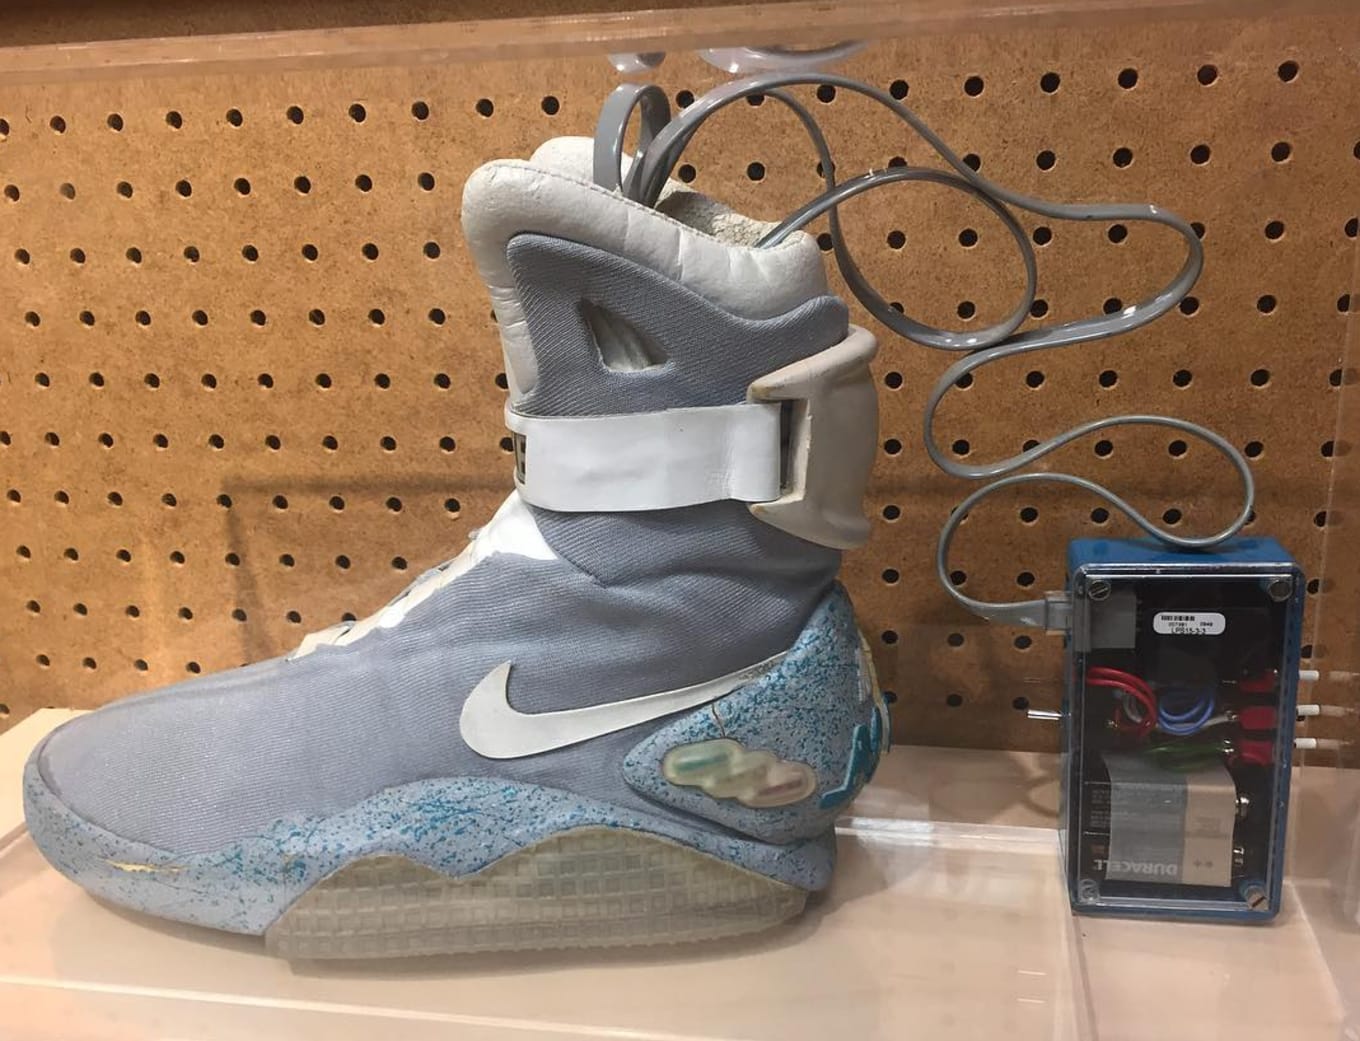 atravesar oscuro Escribe email Nike Mag Self Lacing Shoes Prototype | Sole Collector